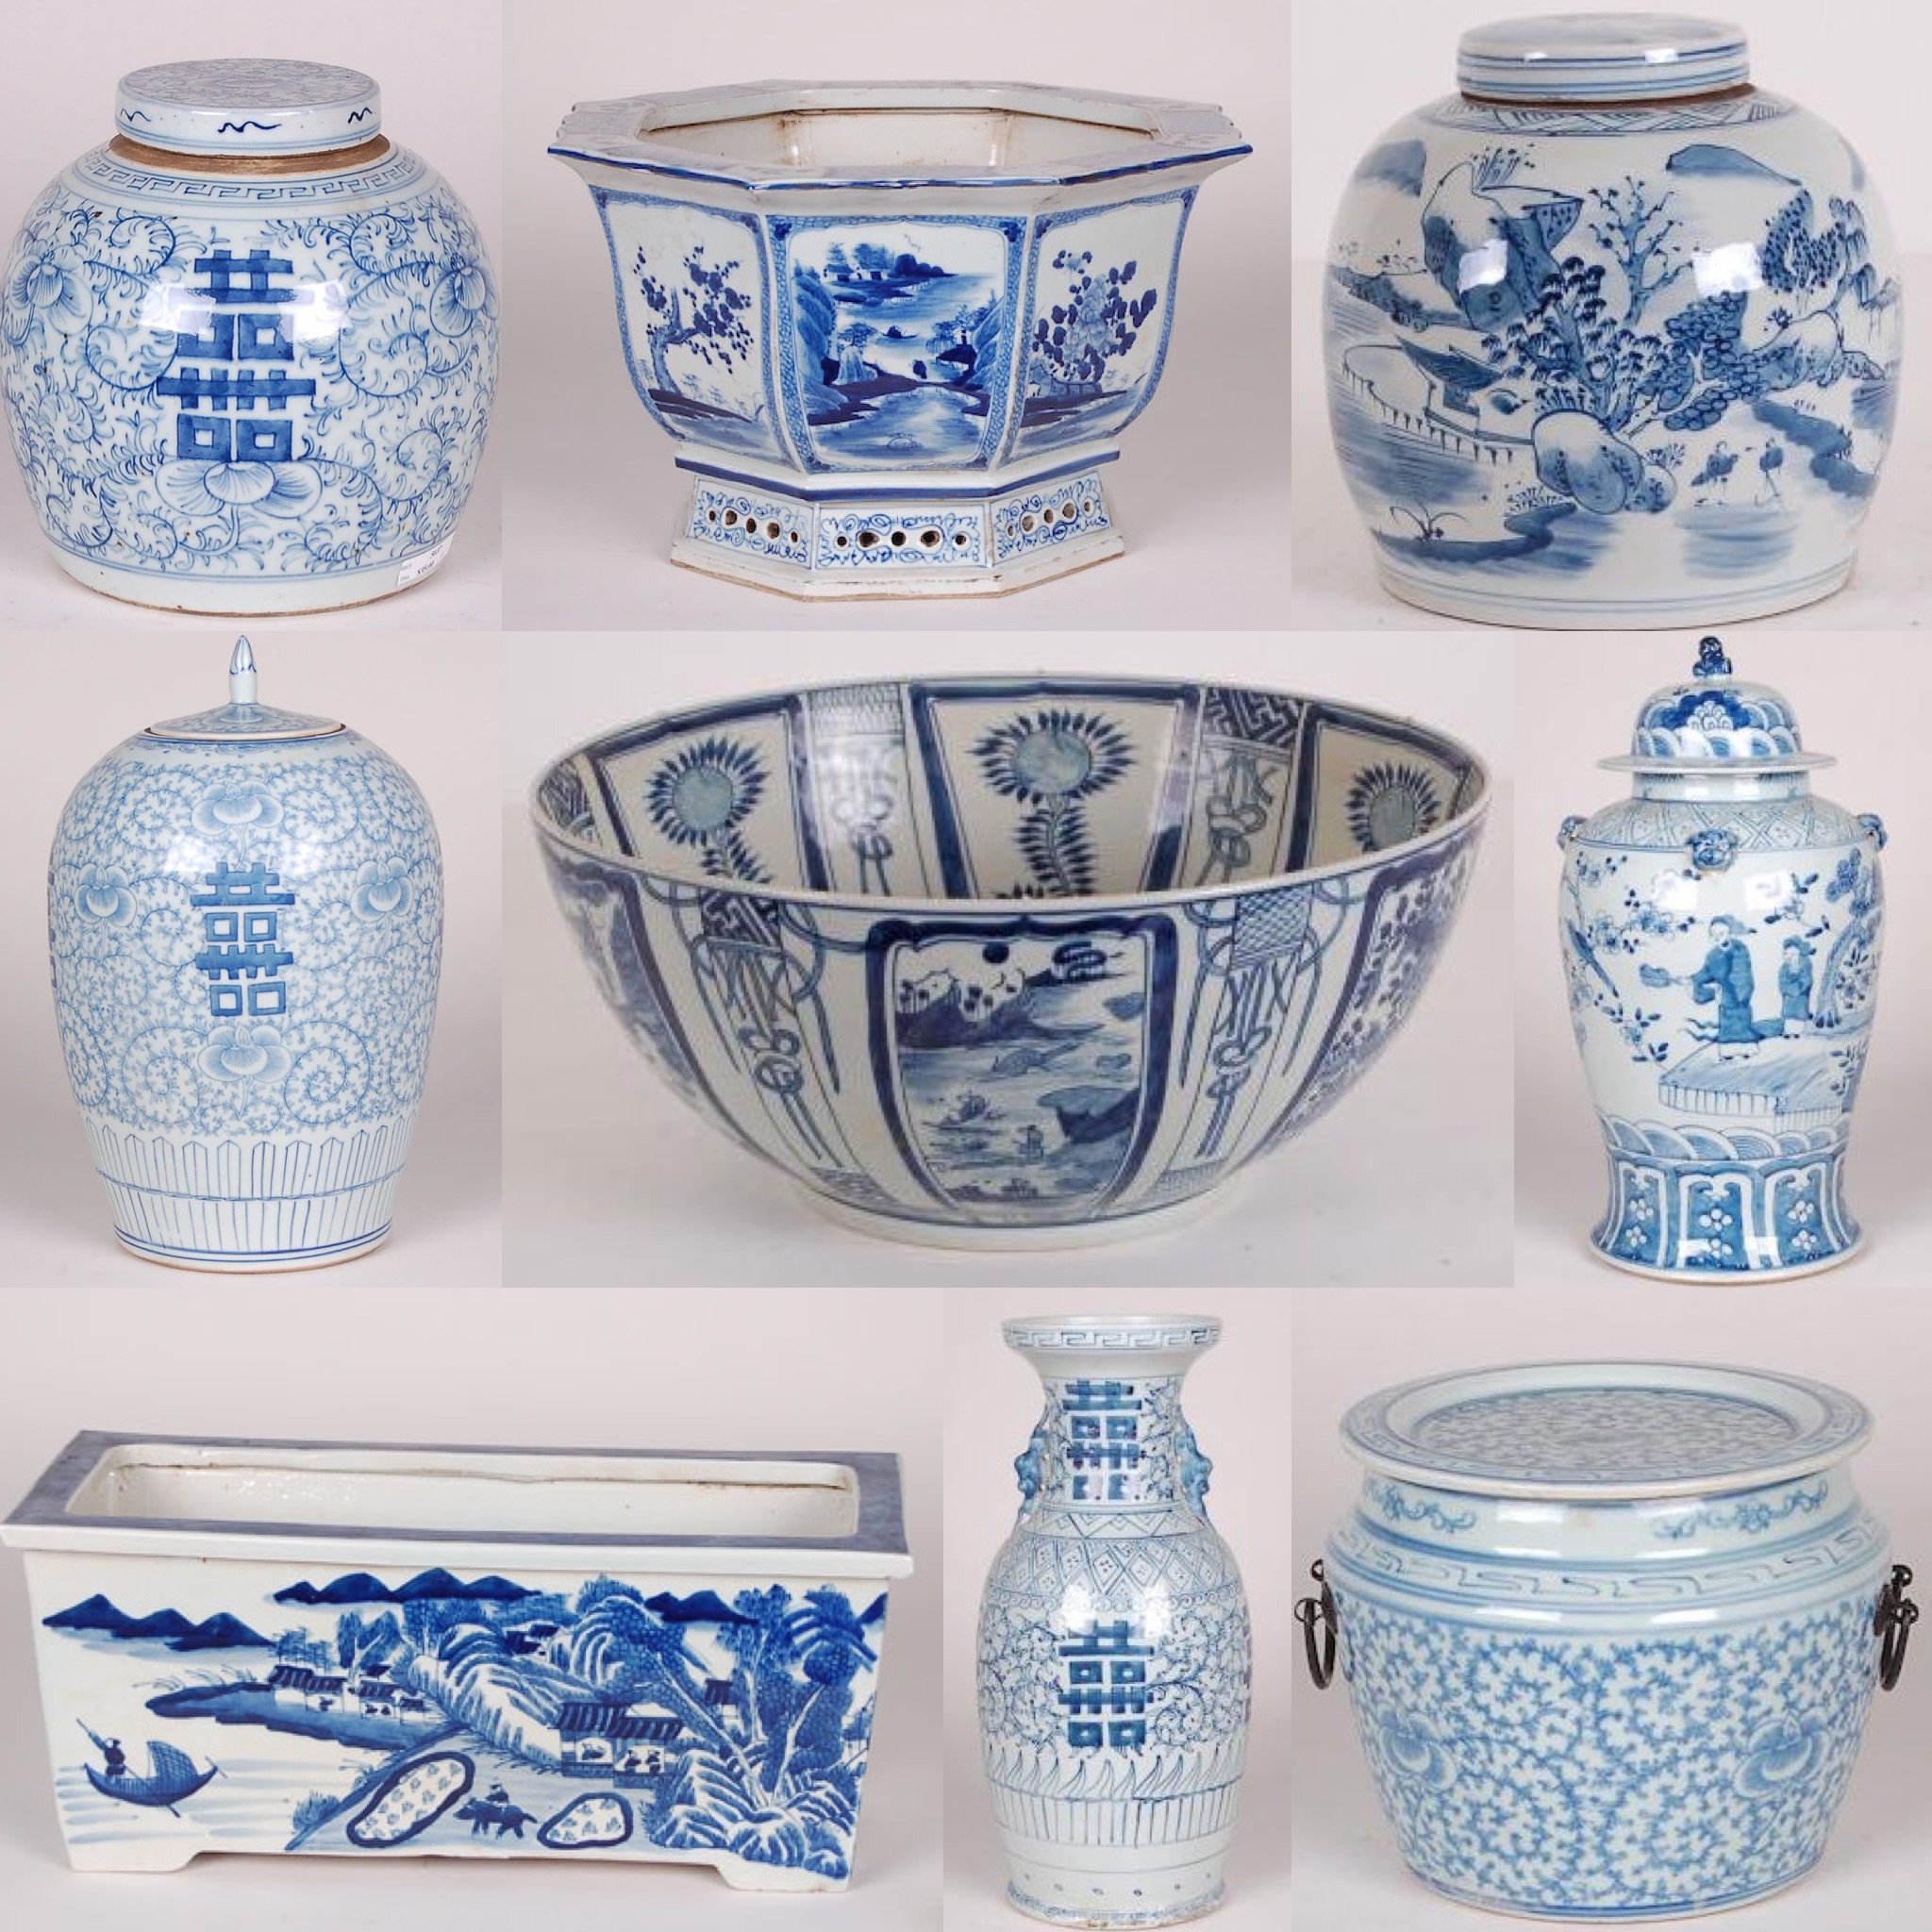 Sample of some of the blue and white pieces available at The Kellogg Collection.